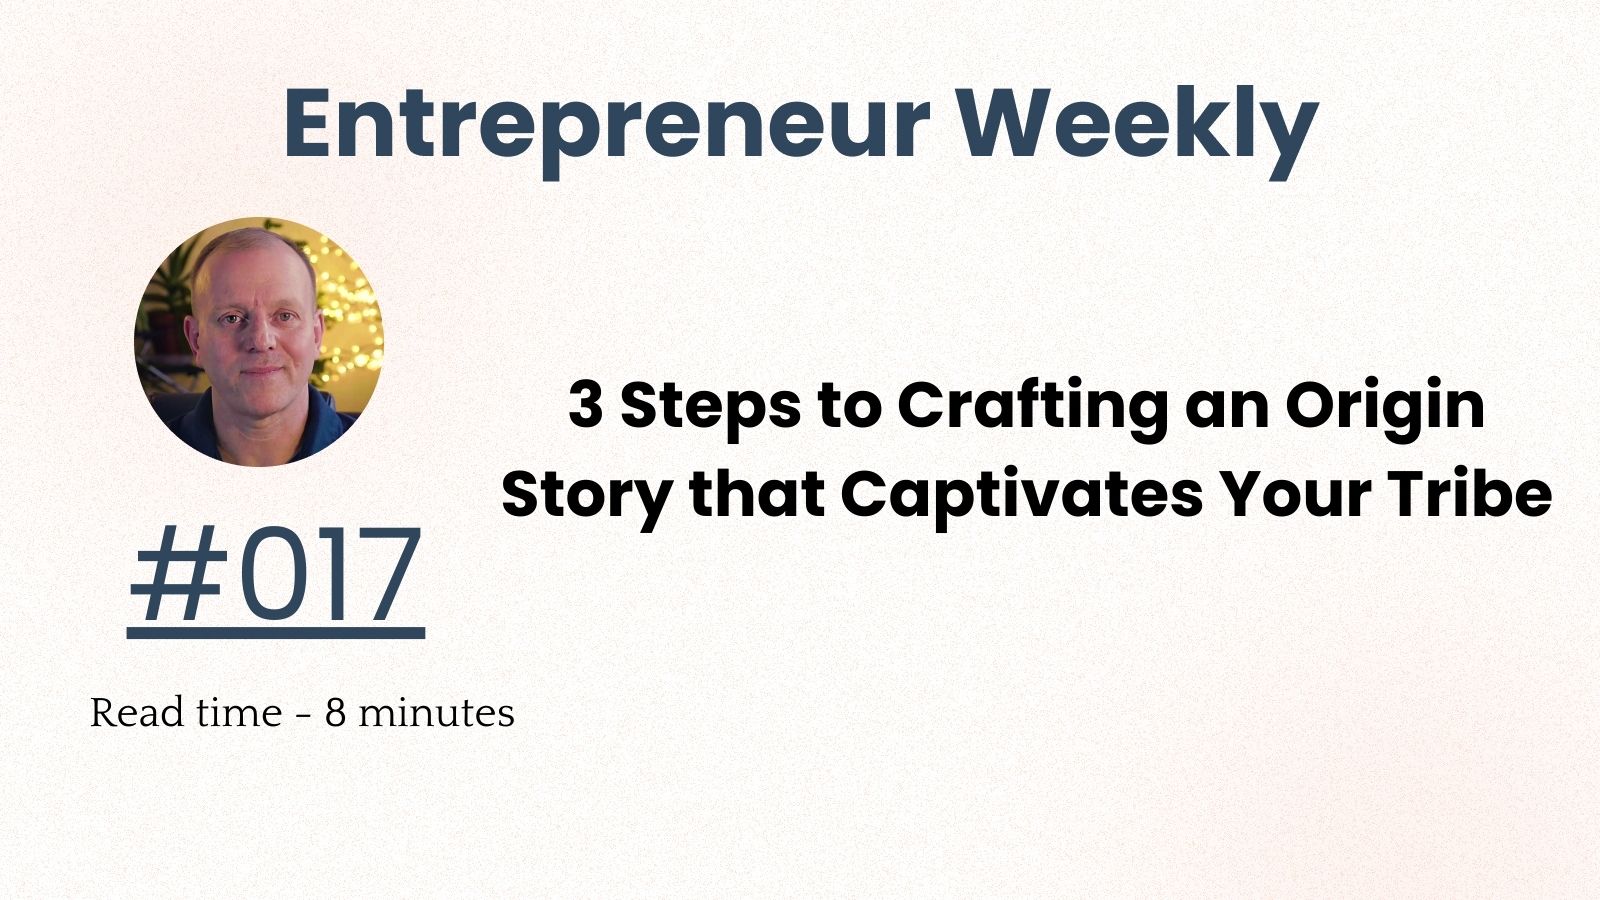 3 Steps to Crafting an Origin Story that Captivates Your Tribe